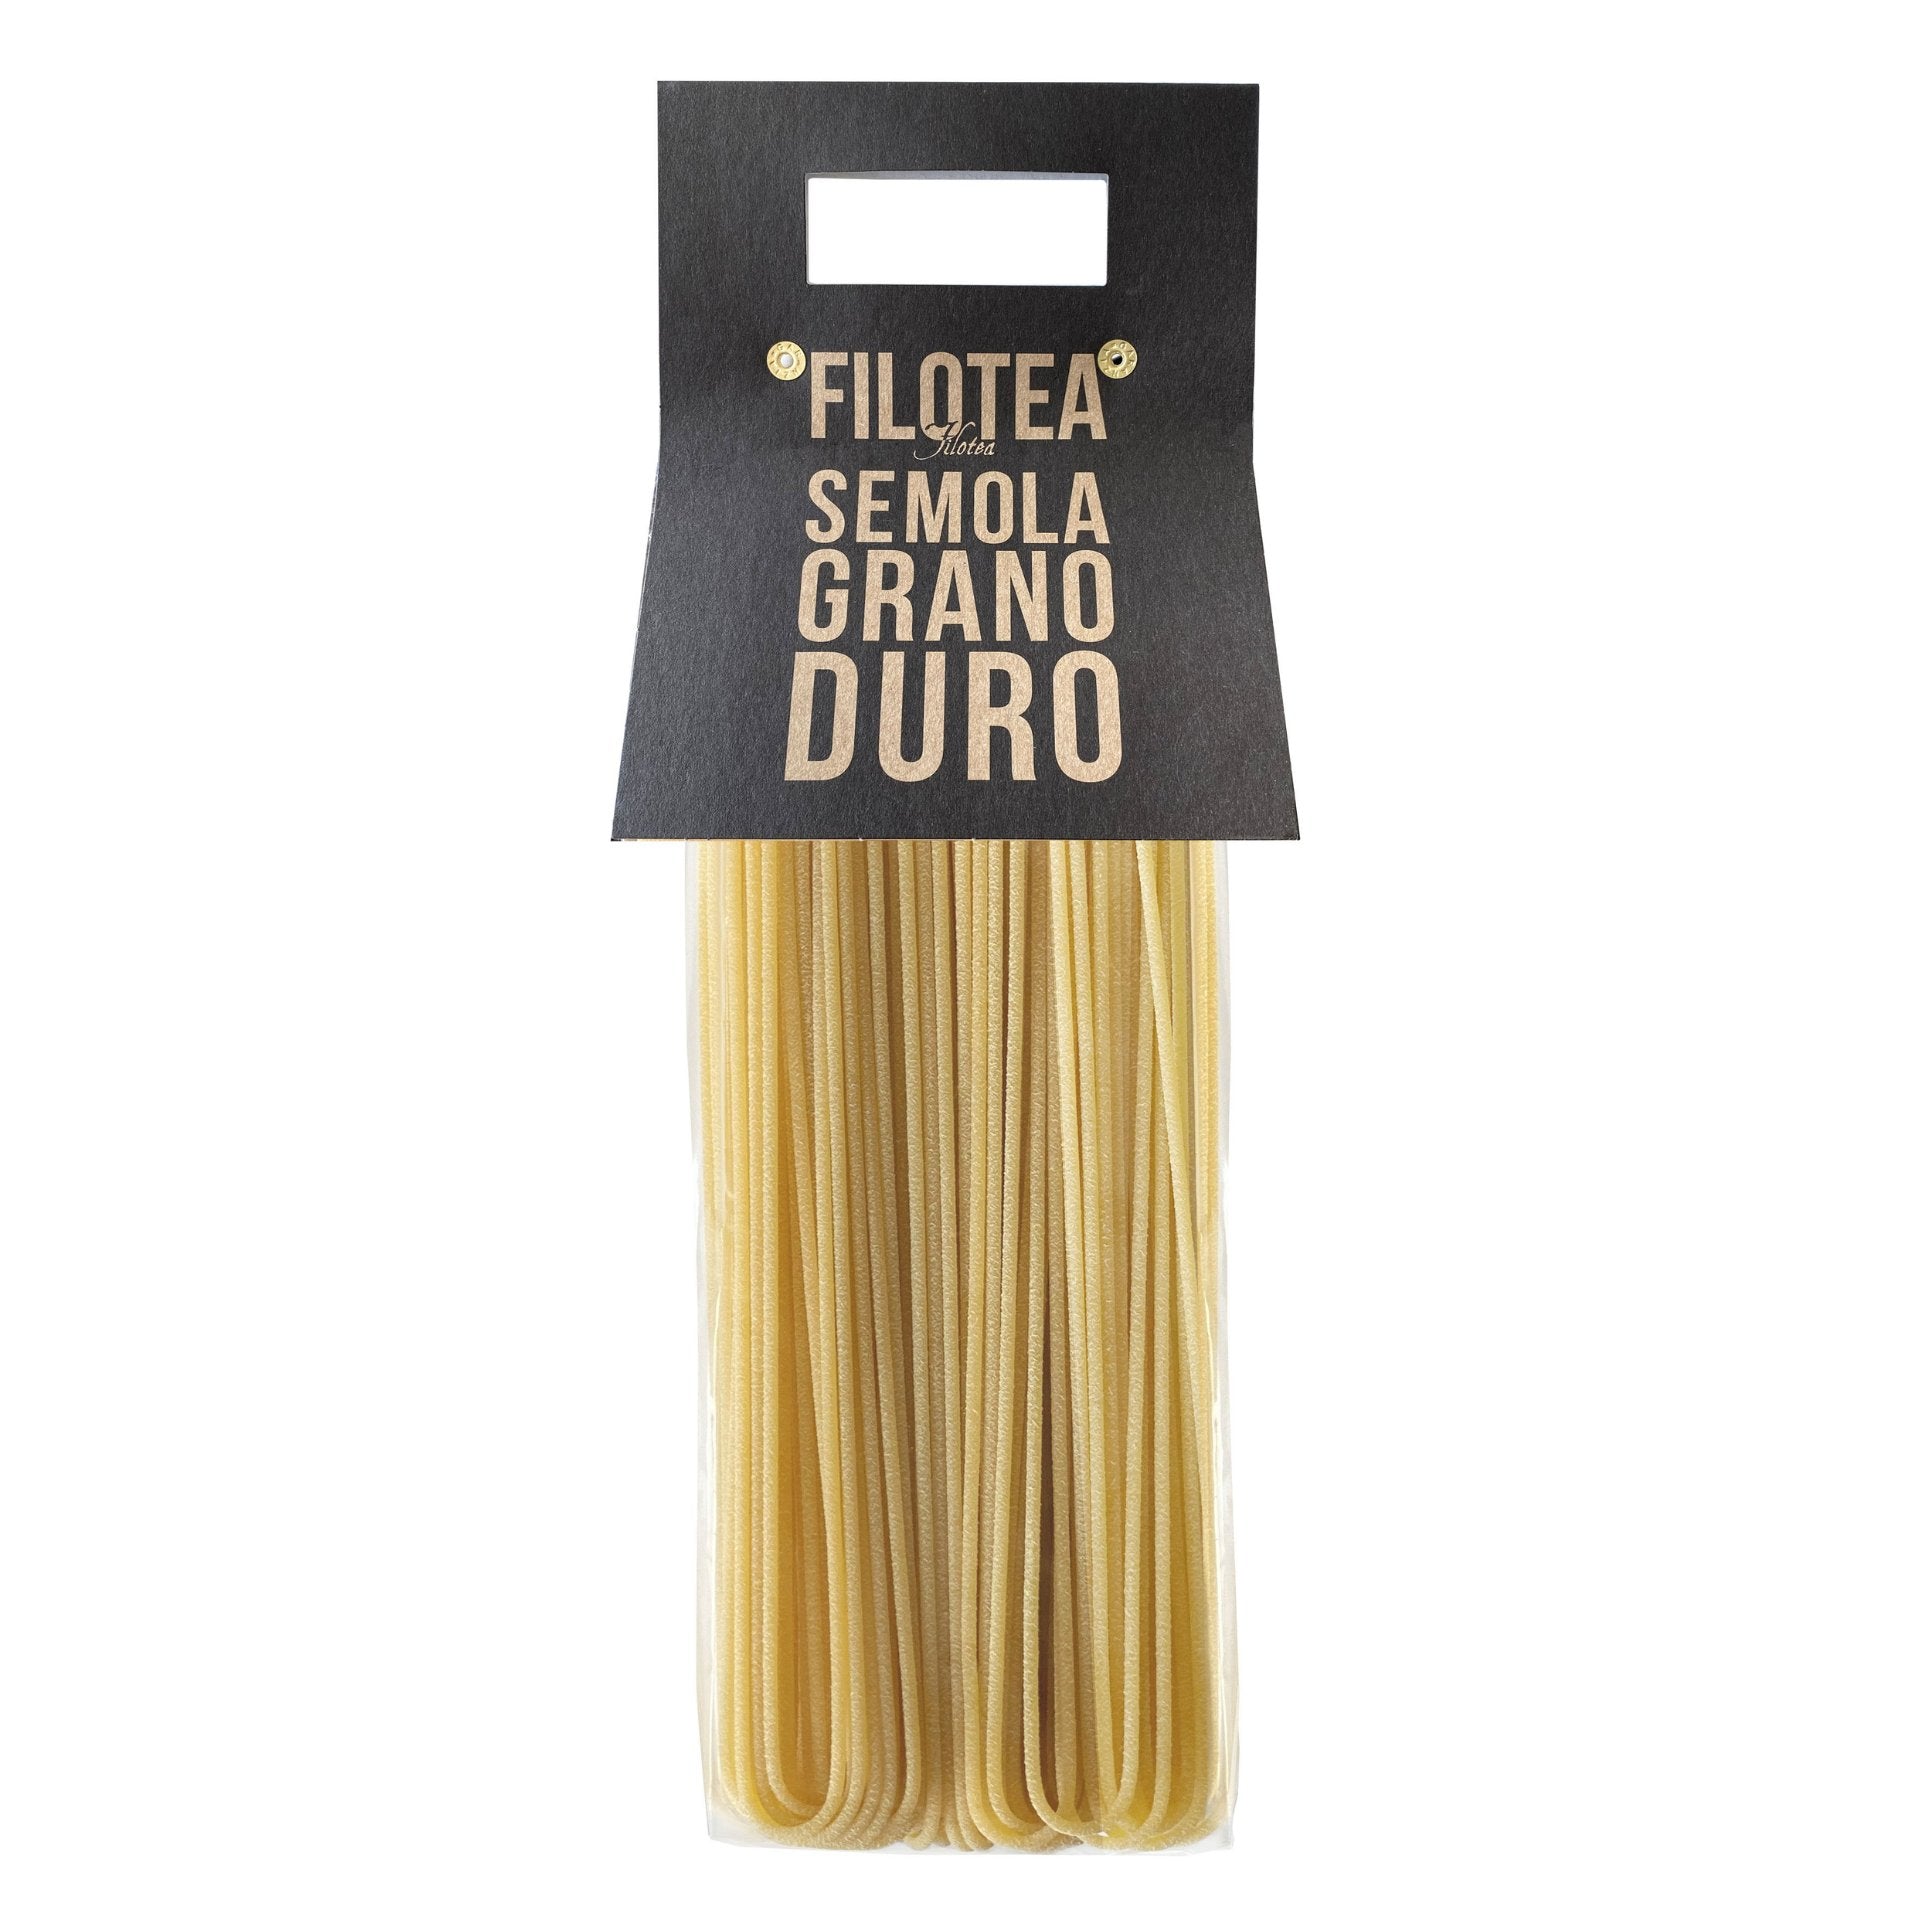 Filotea Spaghettoni Durum Wheat Semolina Pasta 500g  | Imported and distributed in the UK by Just Gourmet Foods